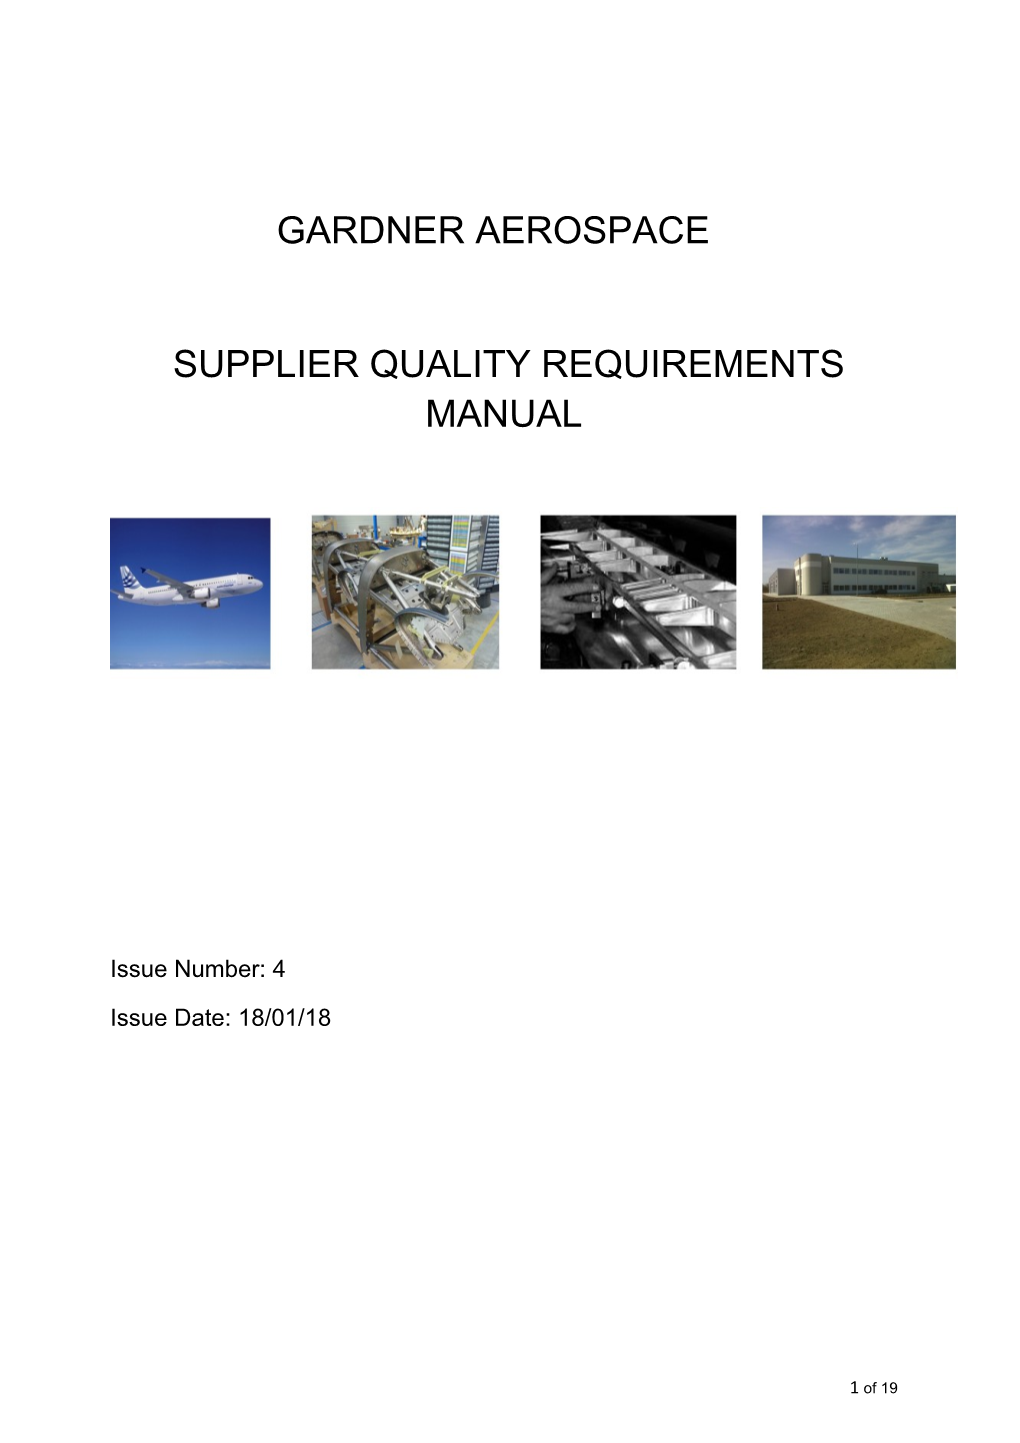 Supplier Quality Requirements Manual